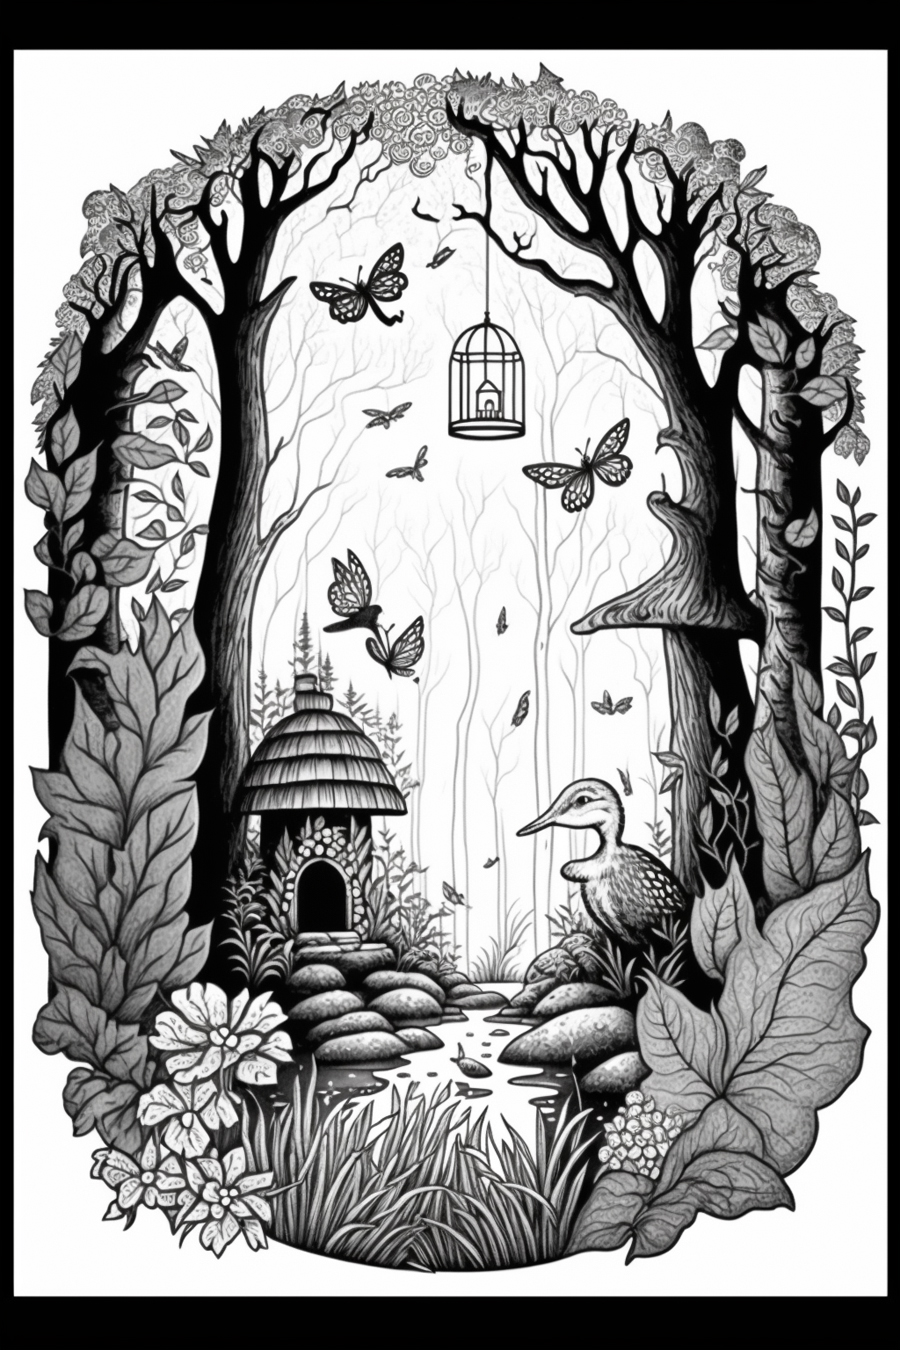 A black and white drawing of a house in the forest.